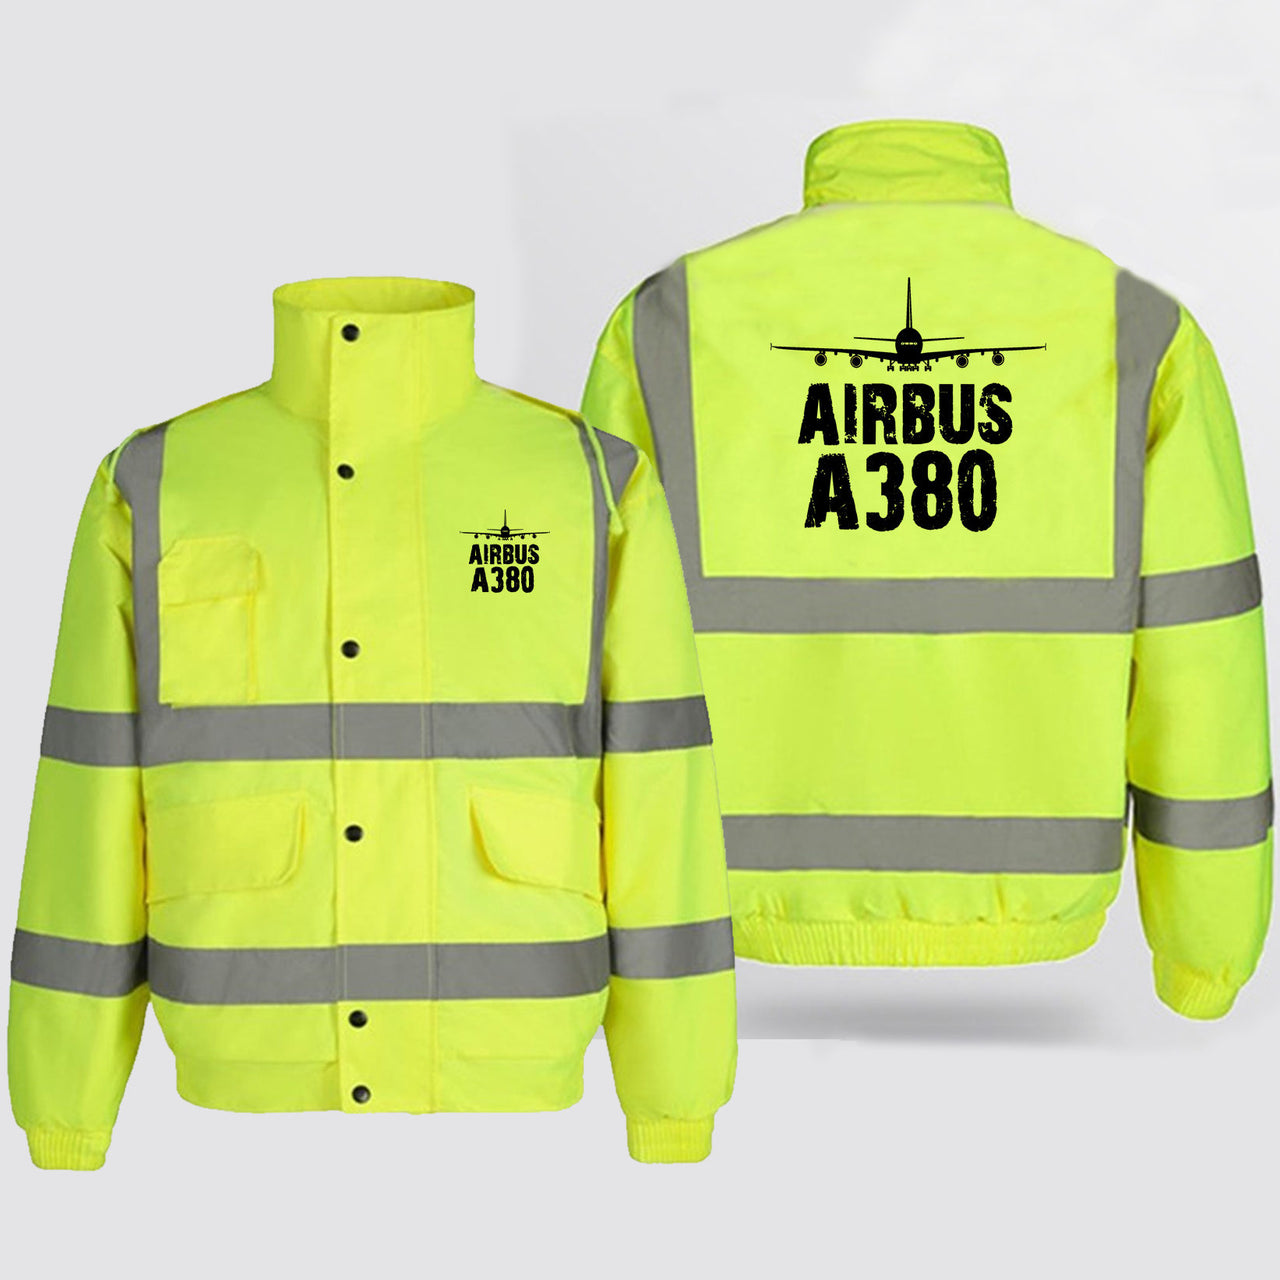 Airbus A380 & Plane Designed Reflective Winter Jackets